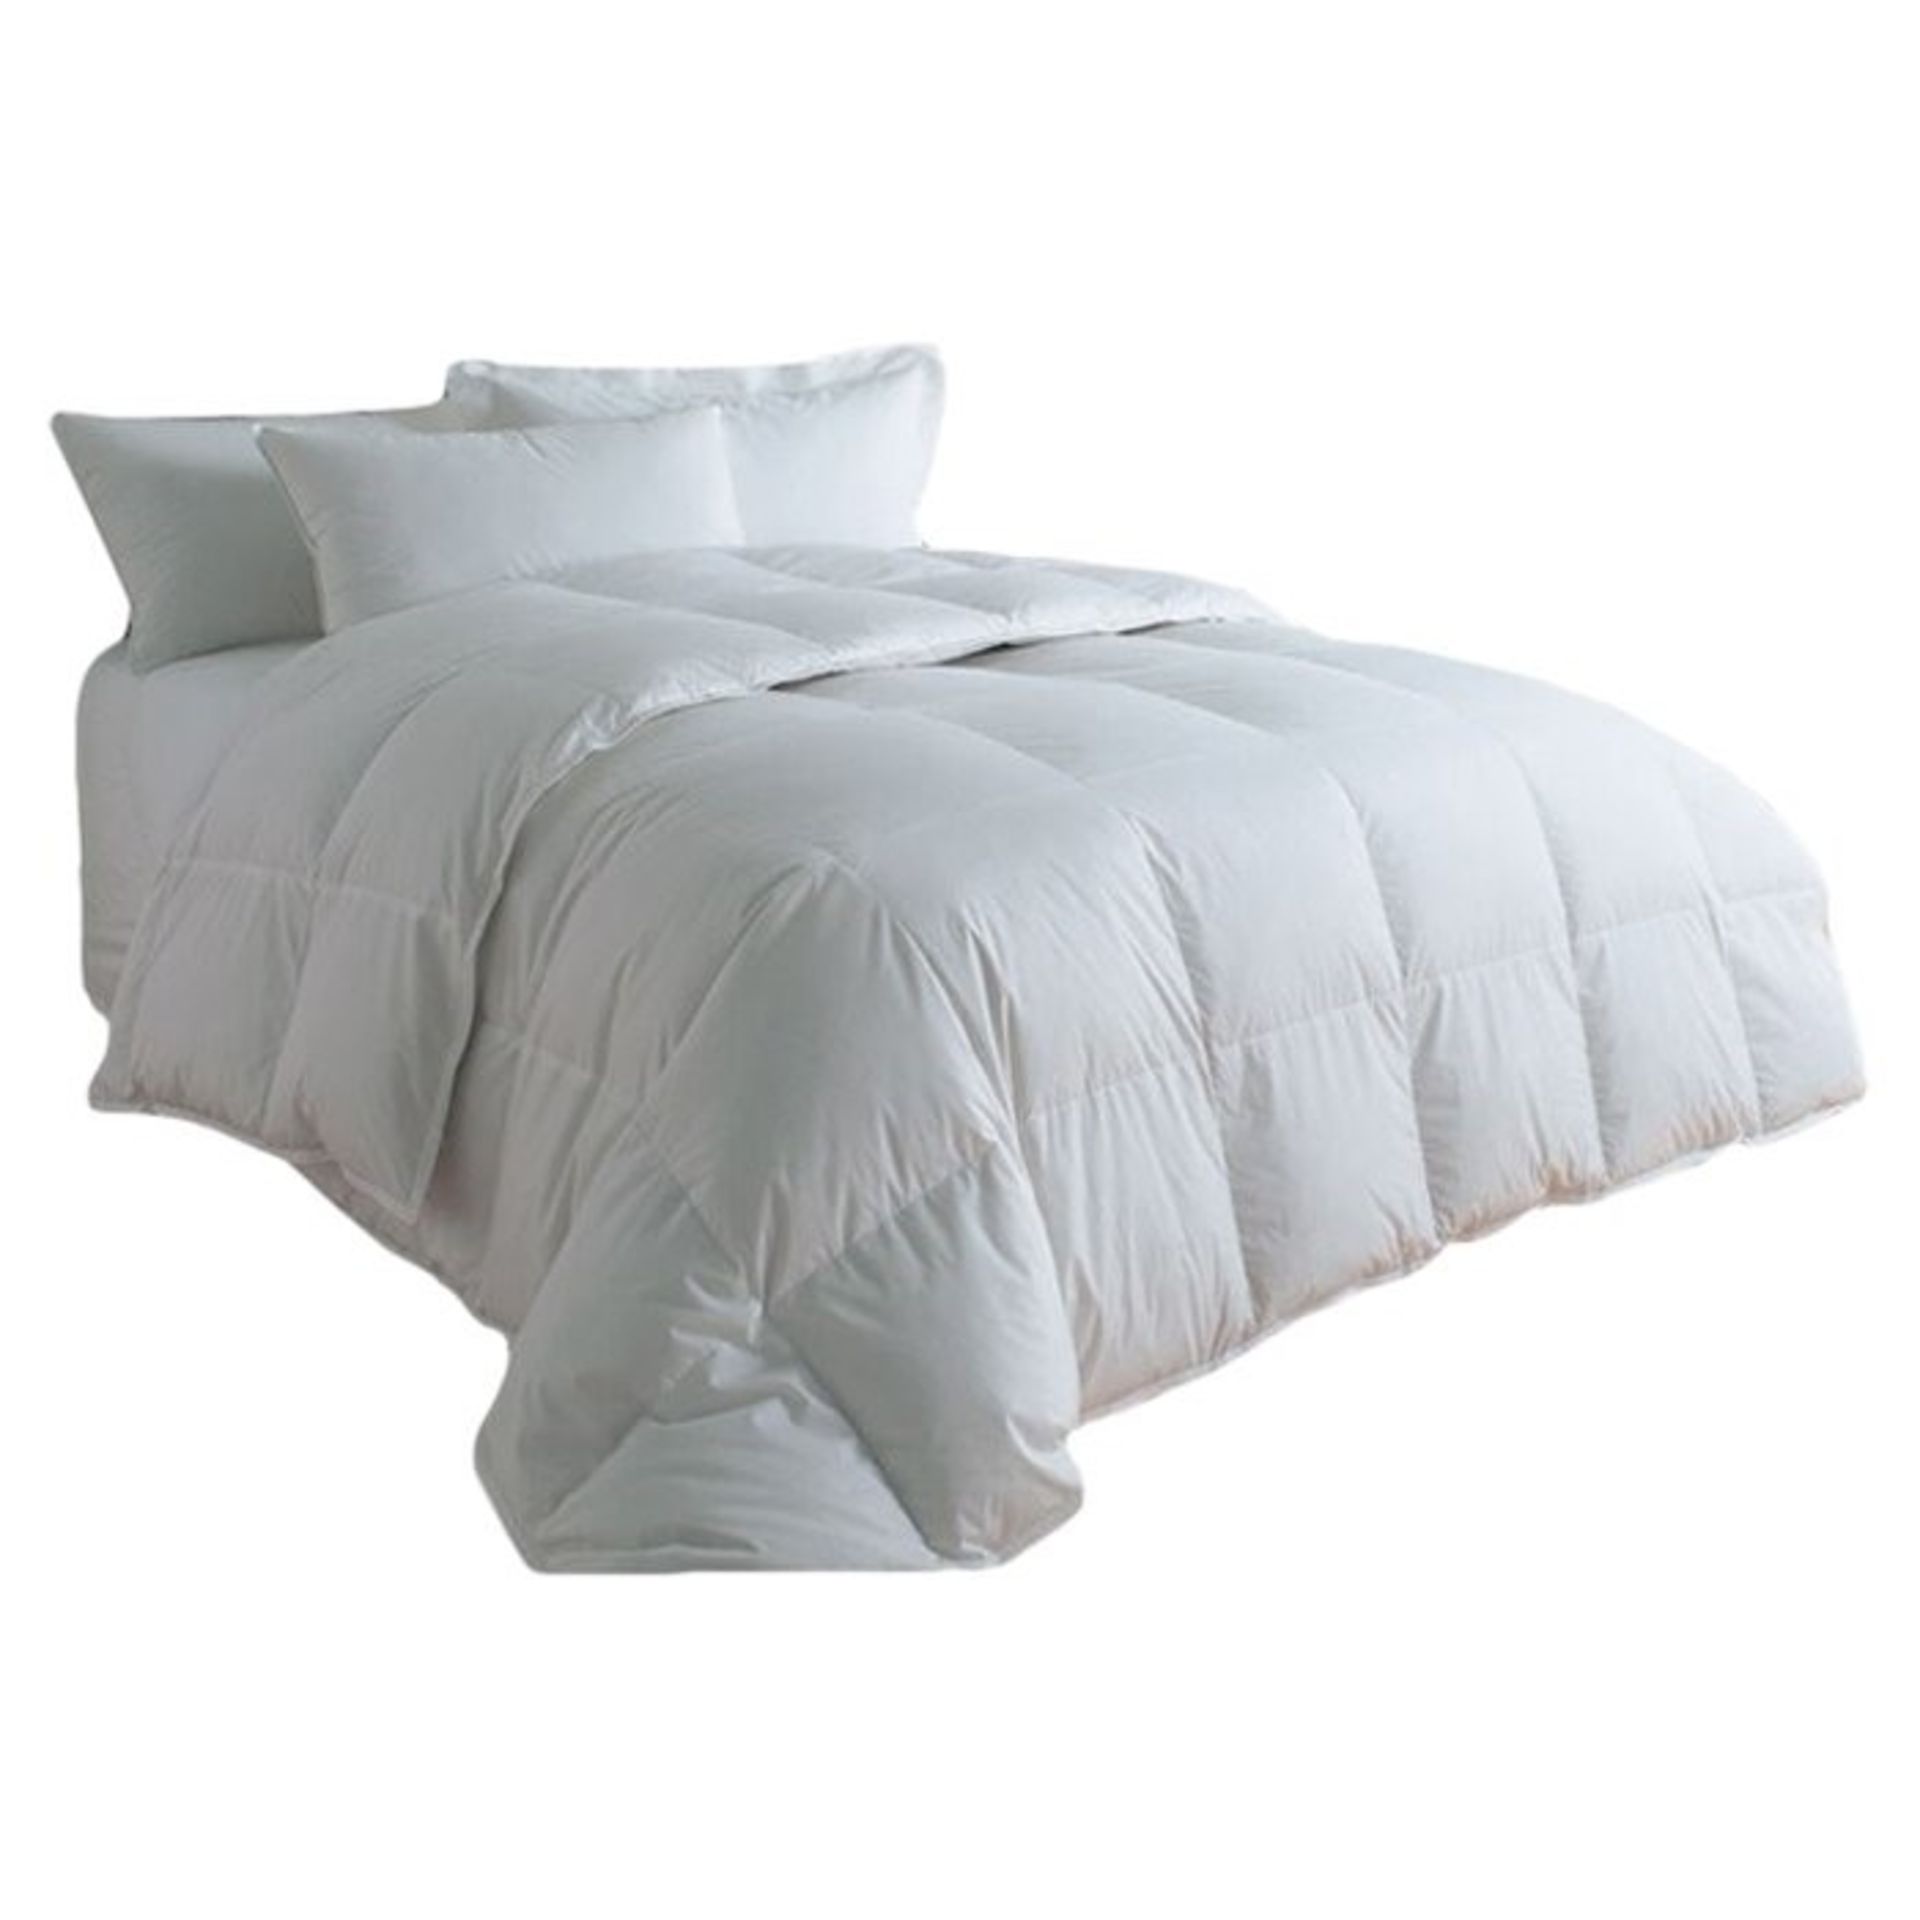 Symple Stuff, Goose Feather & Down 13.5 Tog Duvet Size: Double - RRP £38.99 (SGCY1030.7452232 -